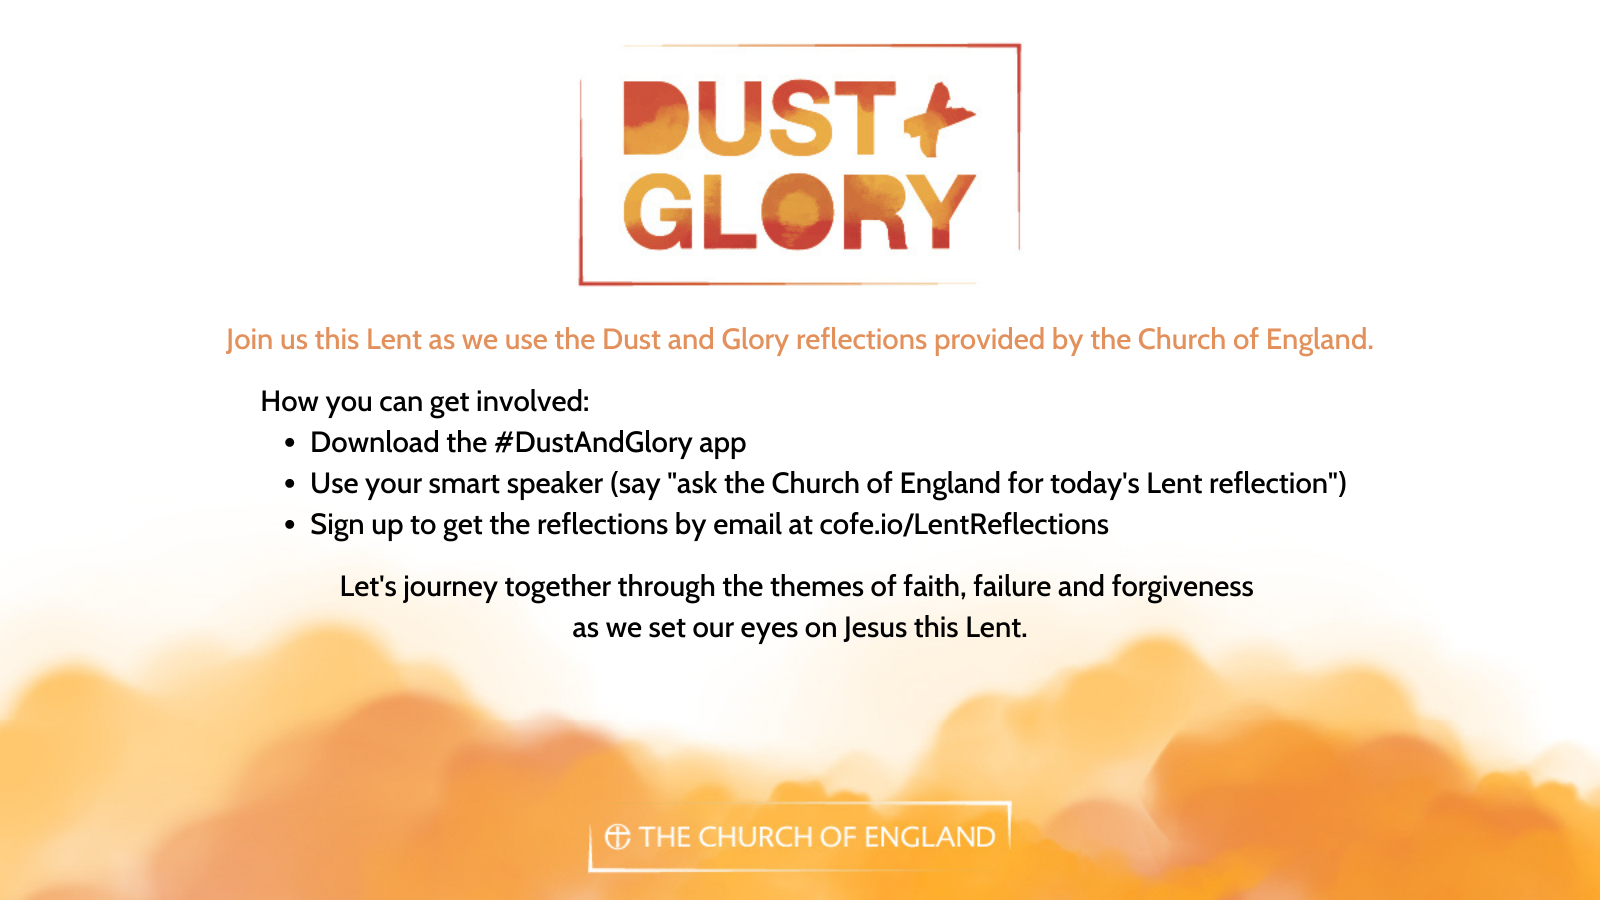 A downloadable infographic with information about how users can access the daily reflections - download the Dust and Glory app, use your smart speaker, sign up to the reflections by email